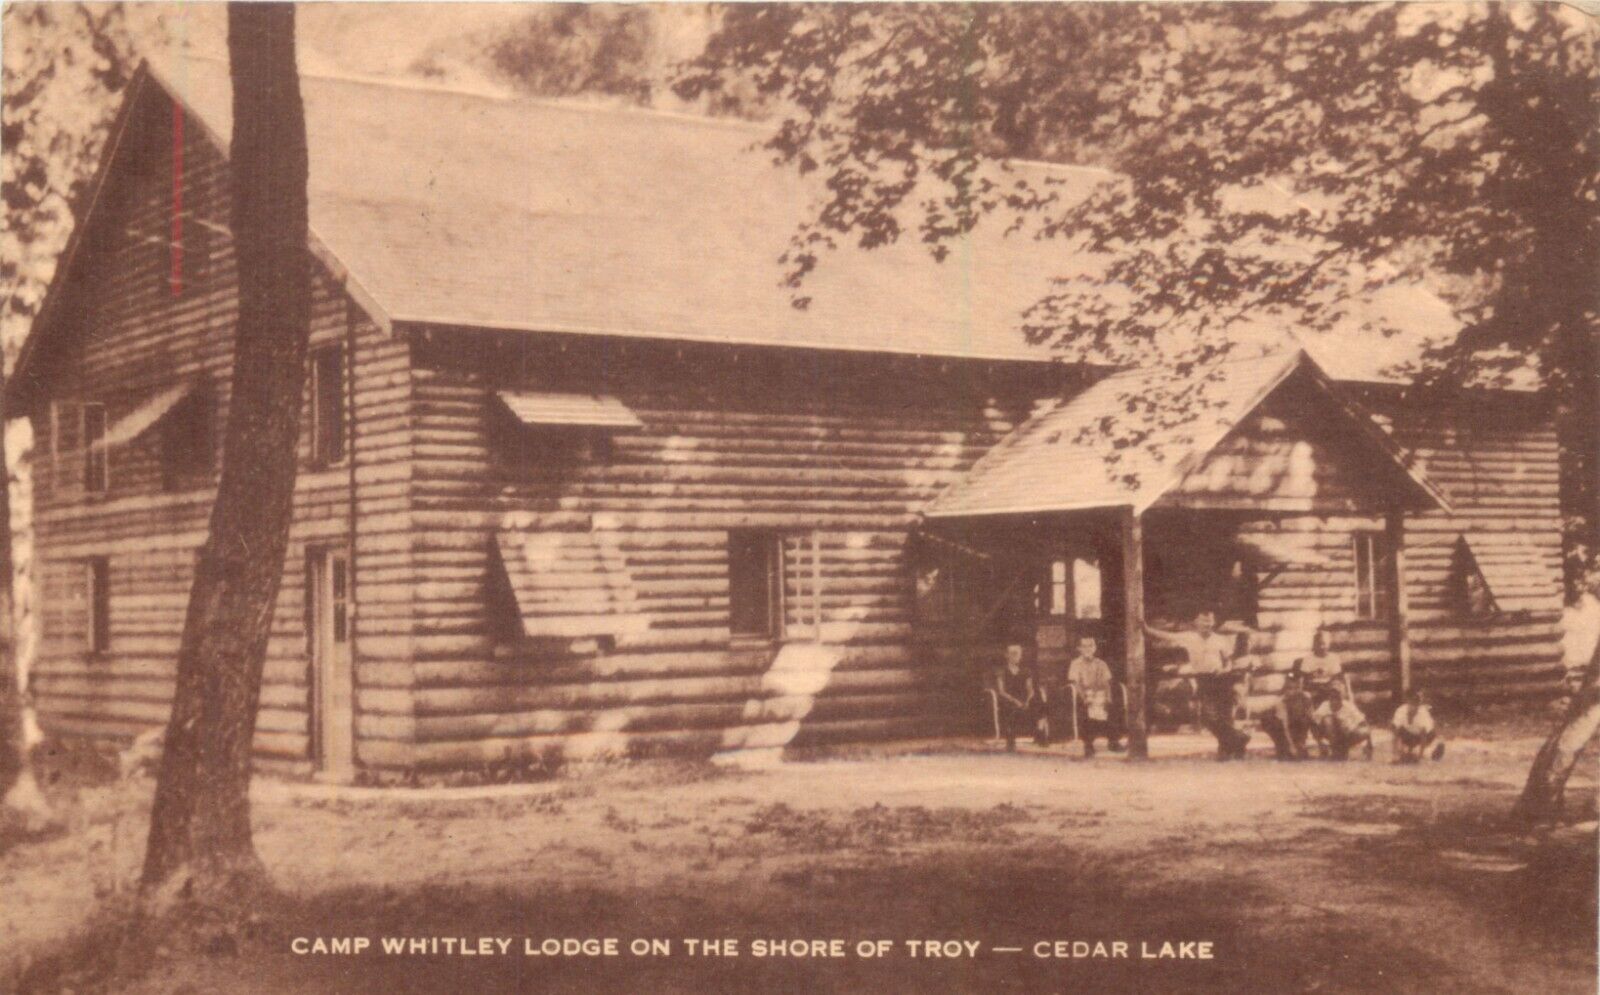 A View Of Camp Whitley Lodge, Troy-Cedar Lake, IN Indiana 1947